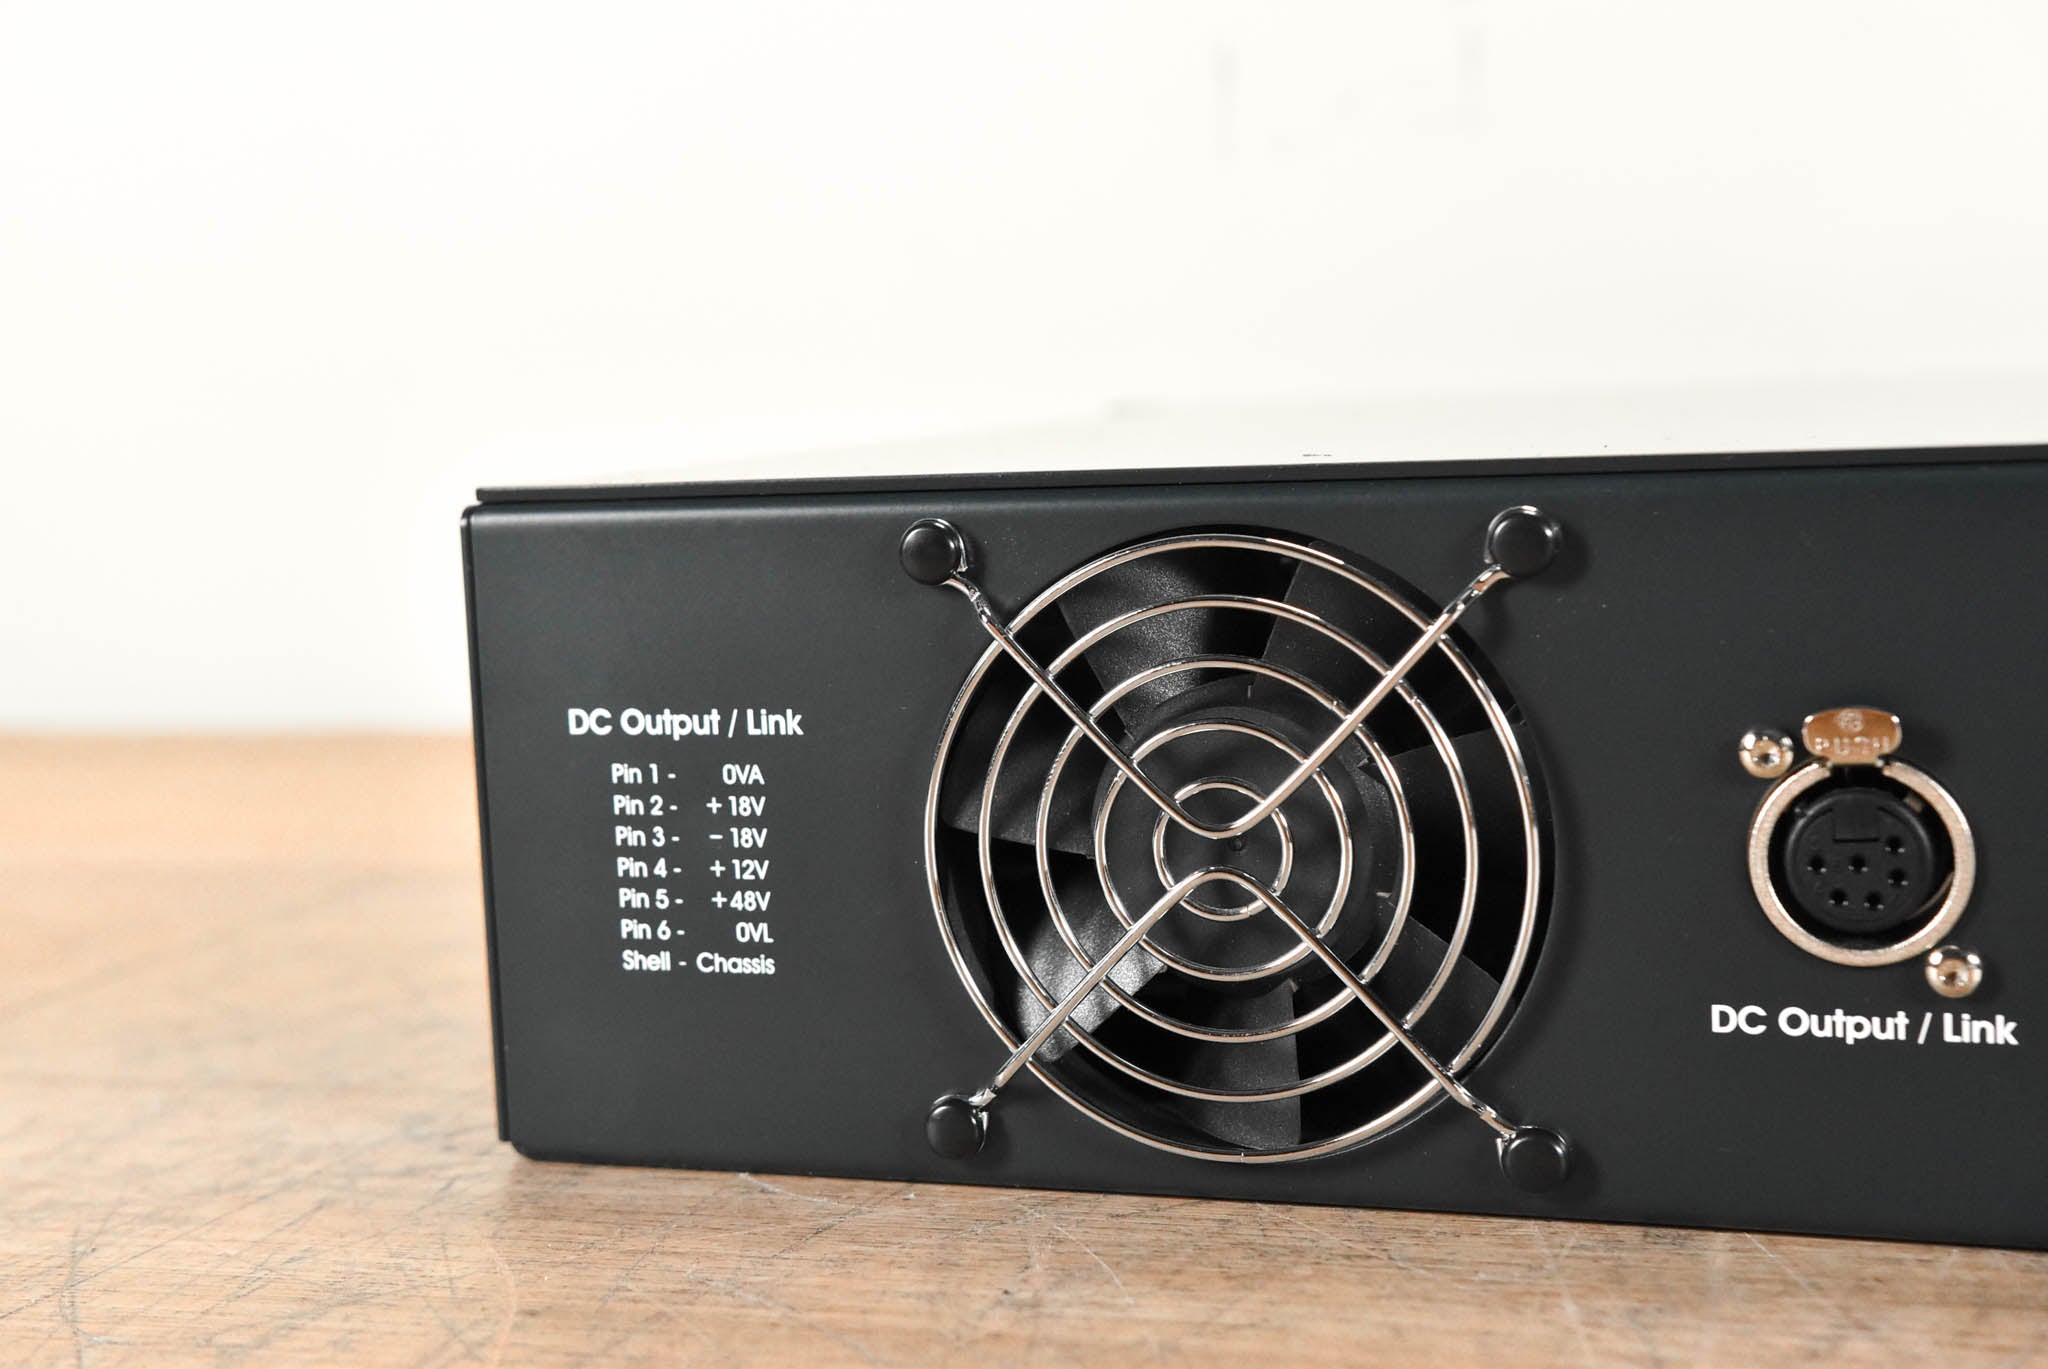 Midas V190 External Power Supply Unit for VENICE and SIENA Consoles